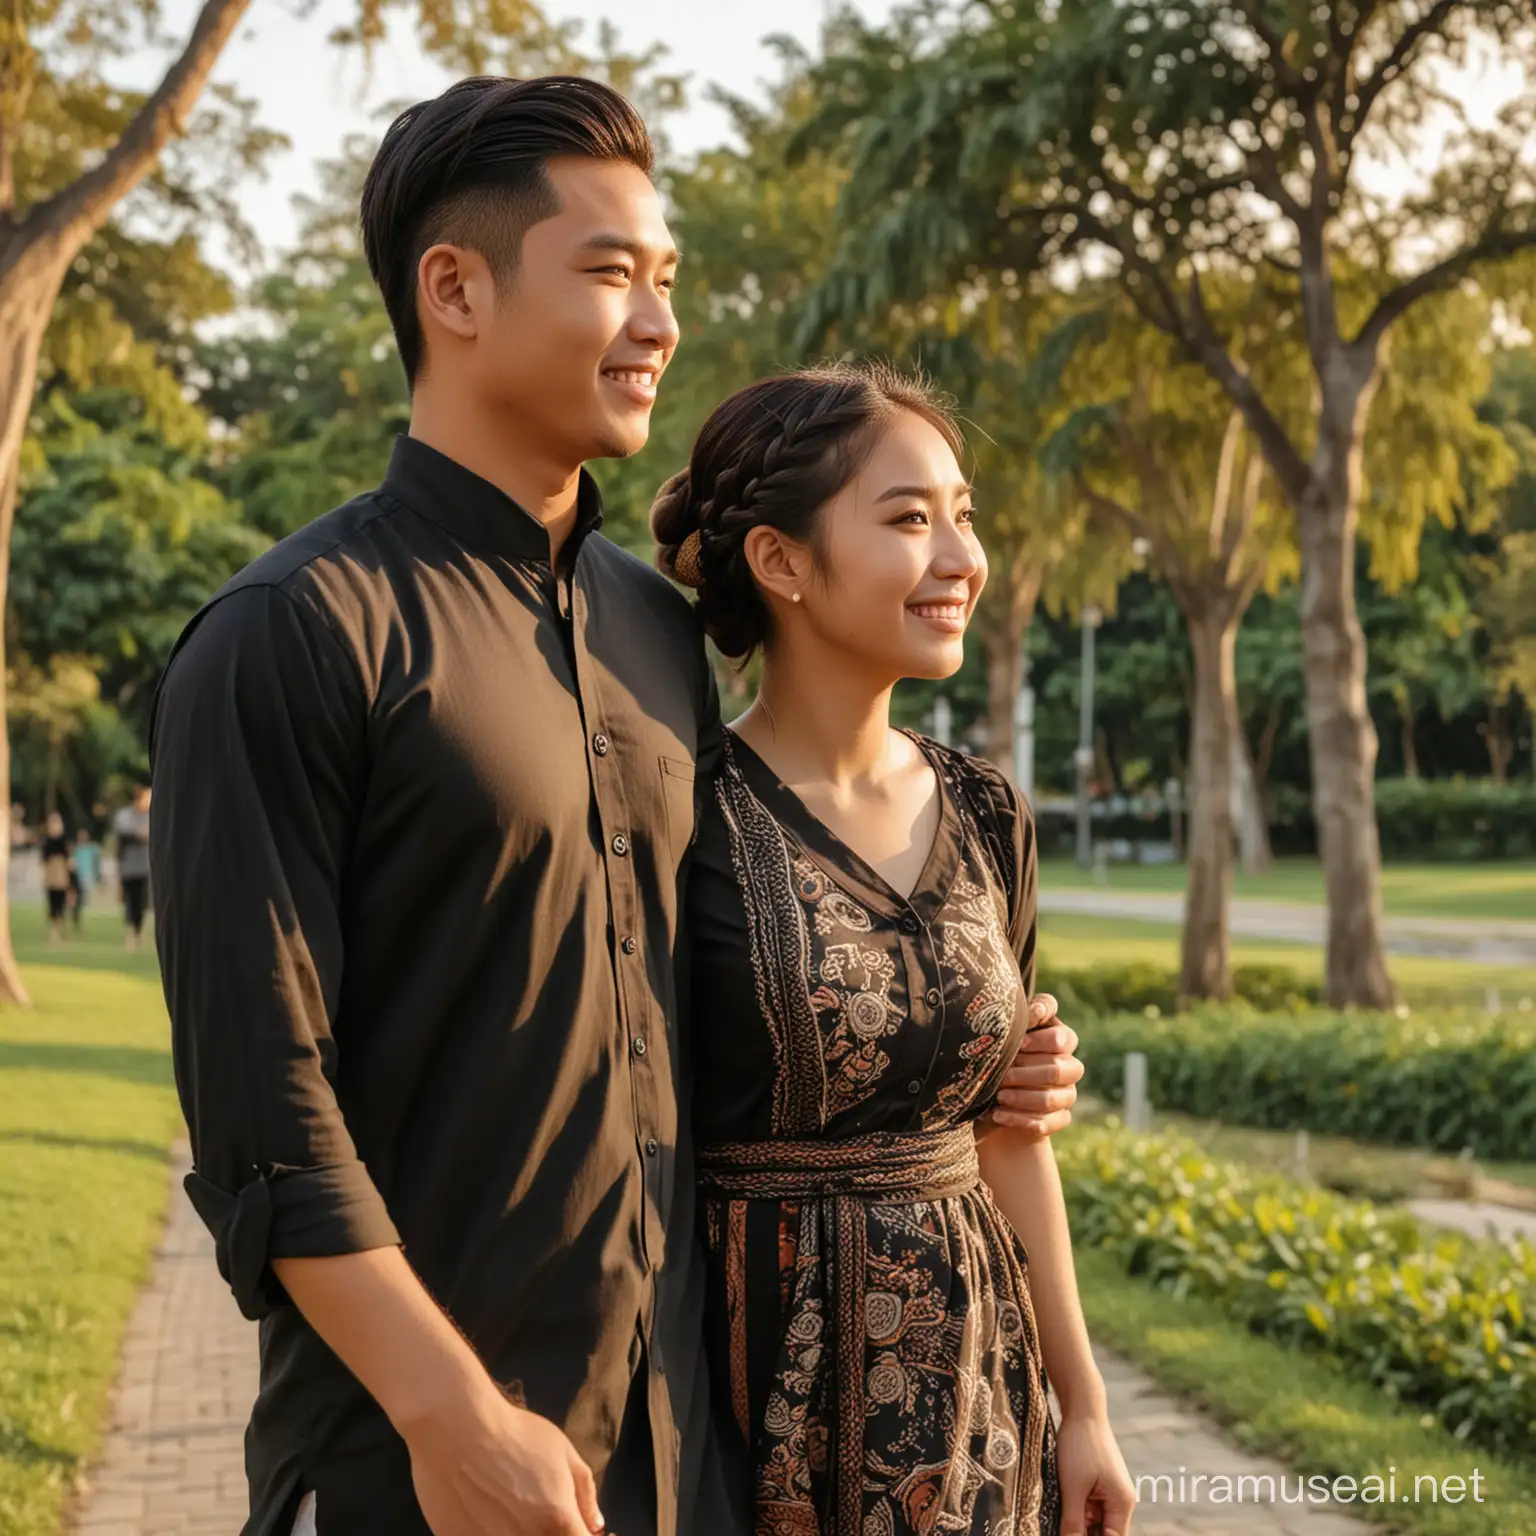 a romantic husband and wife, 26 year old young man, slightly fat Asian, neat short hair wearing a black shirt with slanted buttons (carrying) slightly fat Indonesian woman, hair braided and tied in a kufa ponytail, beautiful dress with sahr'i motif, (holding hands) healing smile, . walking in the park at sunset